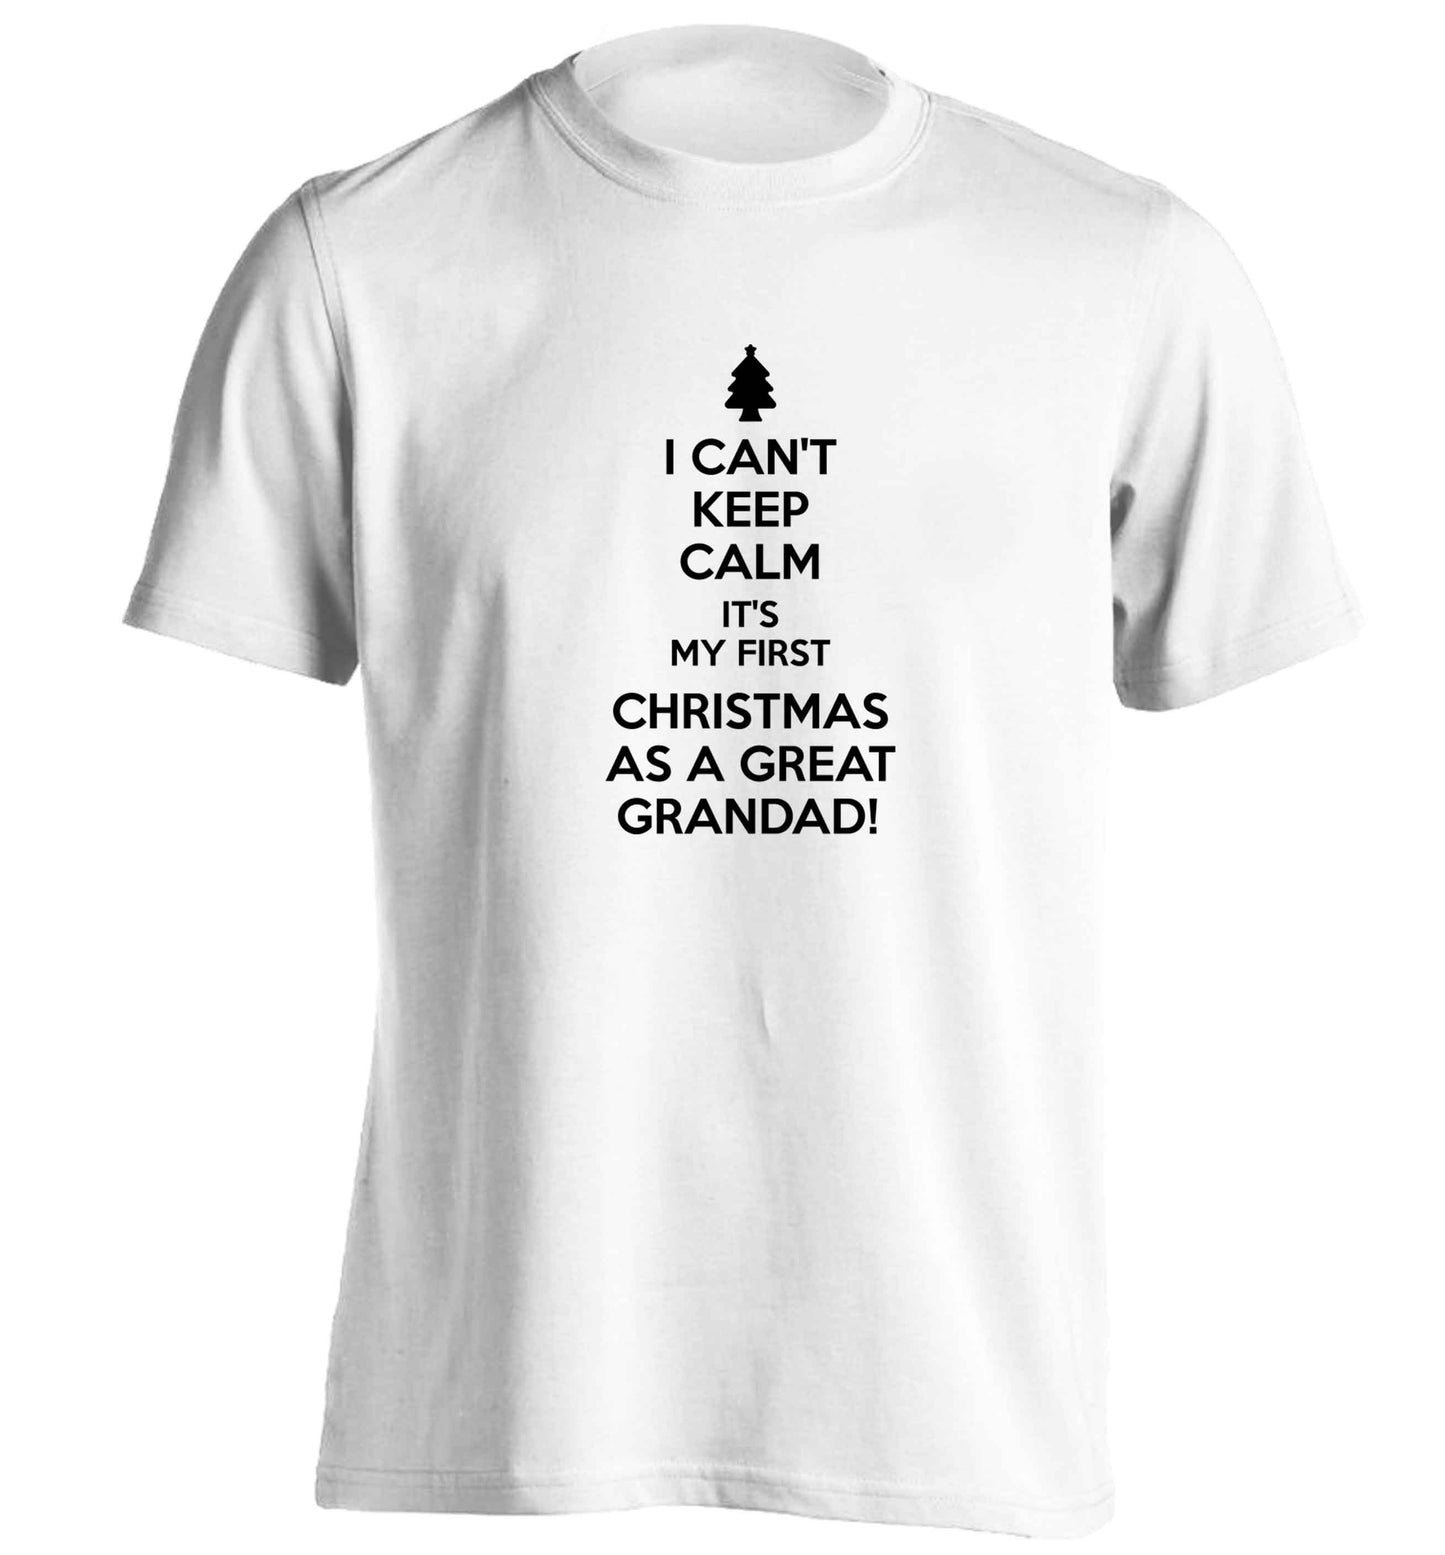 I can't keep calm it's my first Christmas as a great grandad! adults unisex white Tshirt 2XL